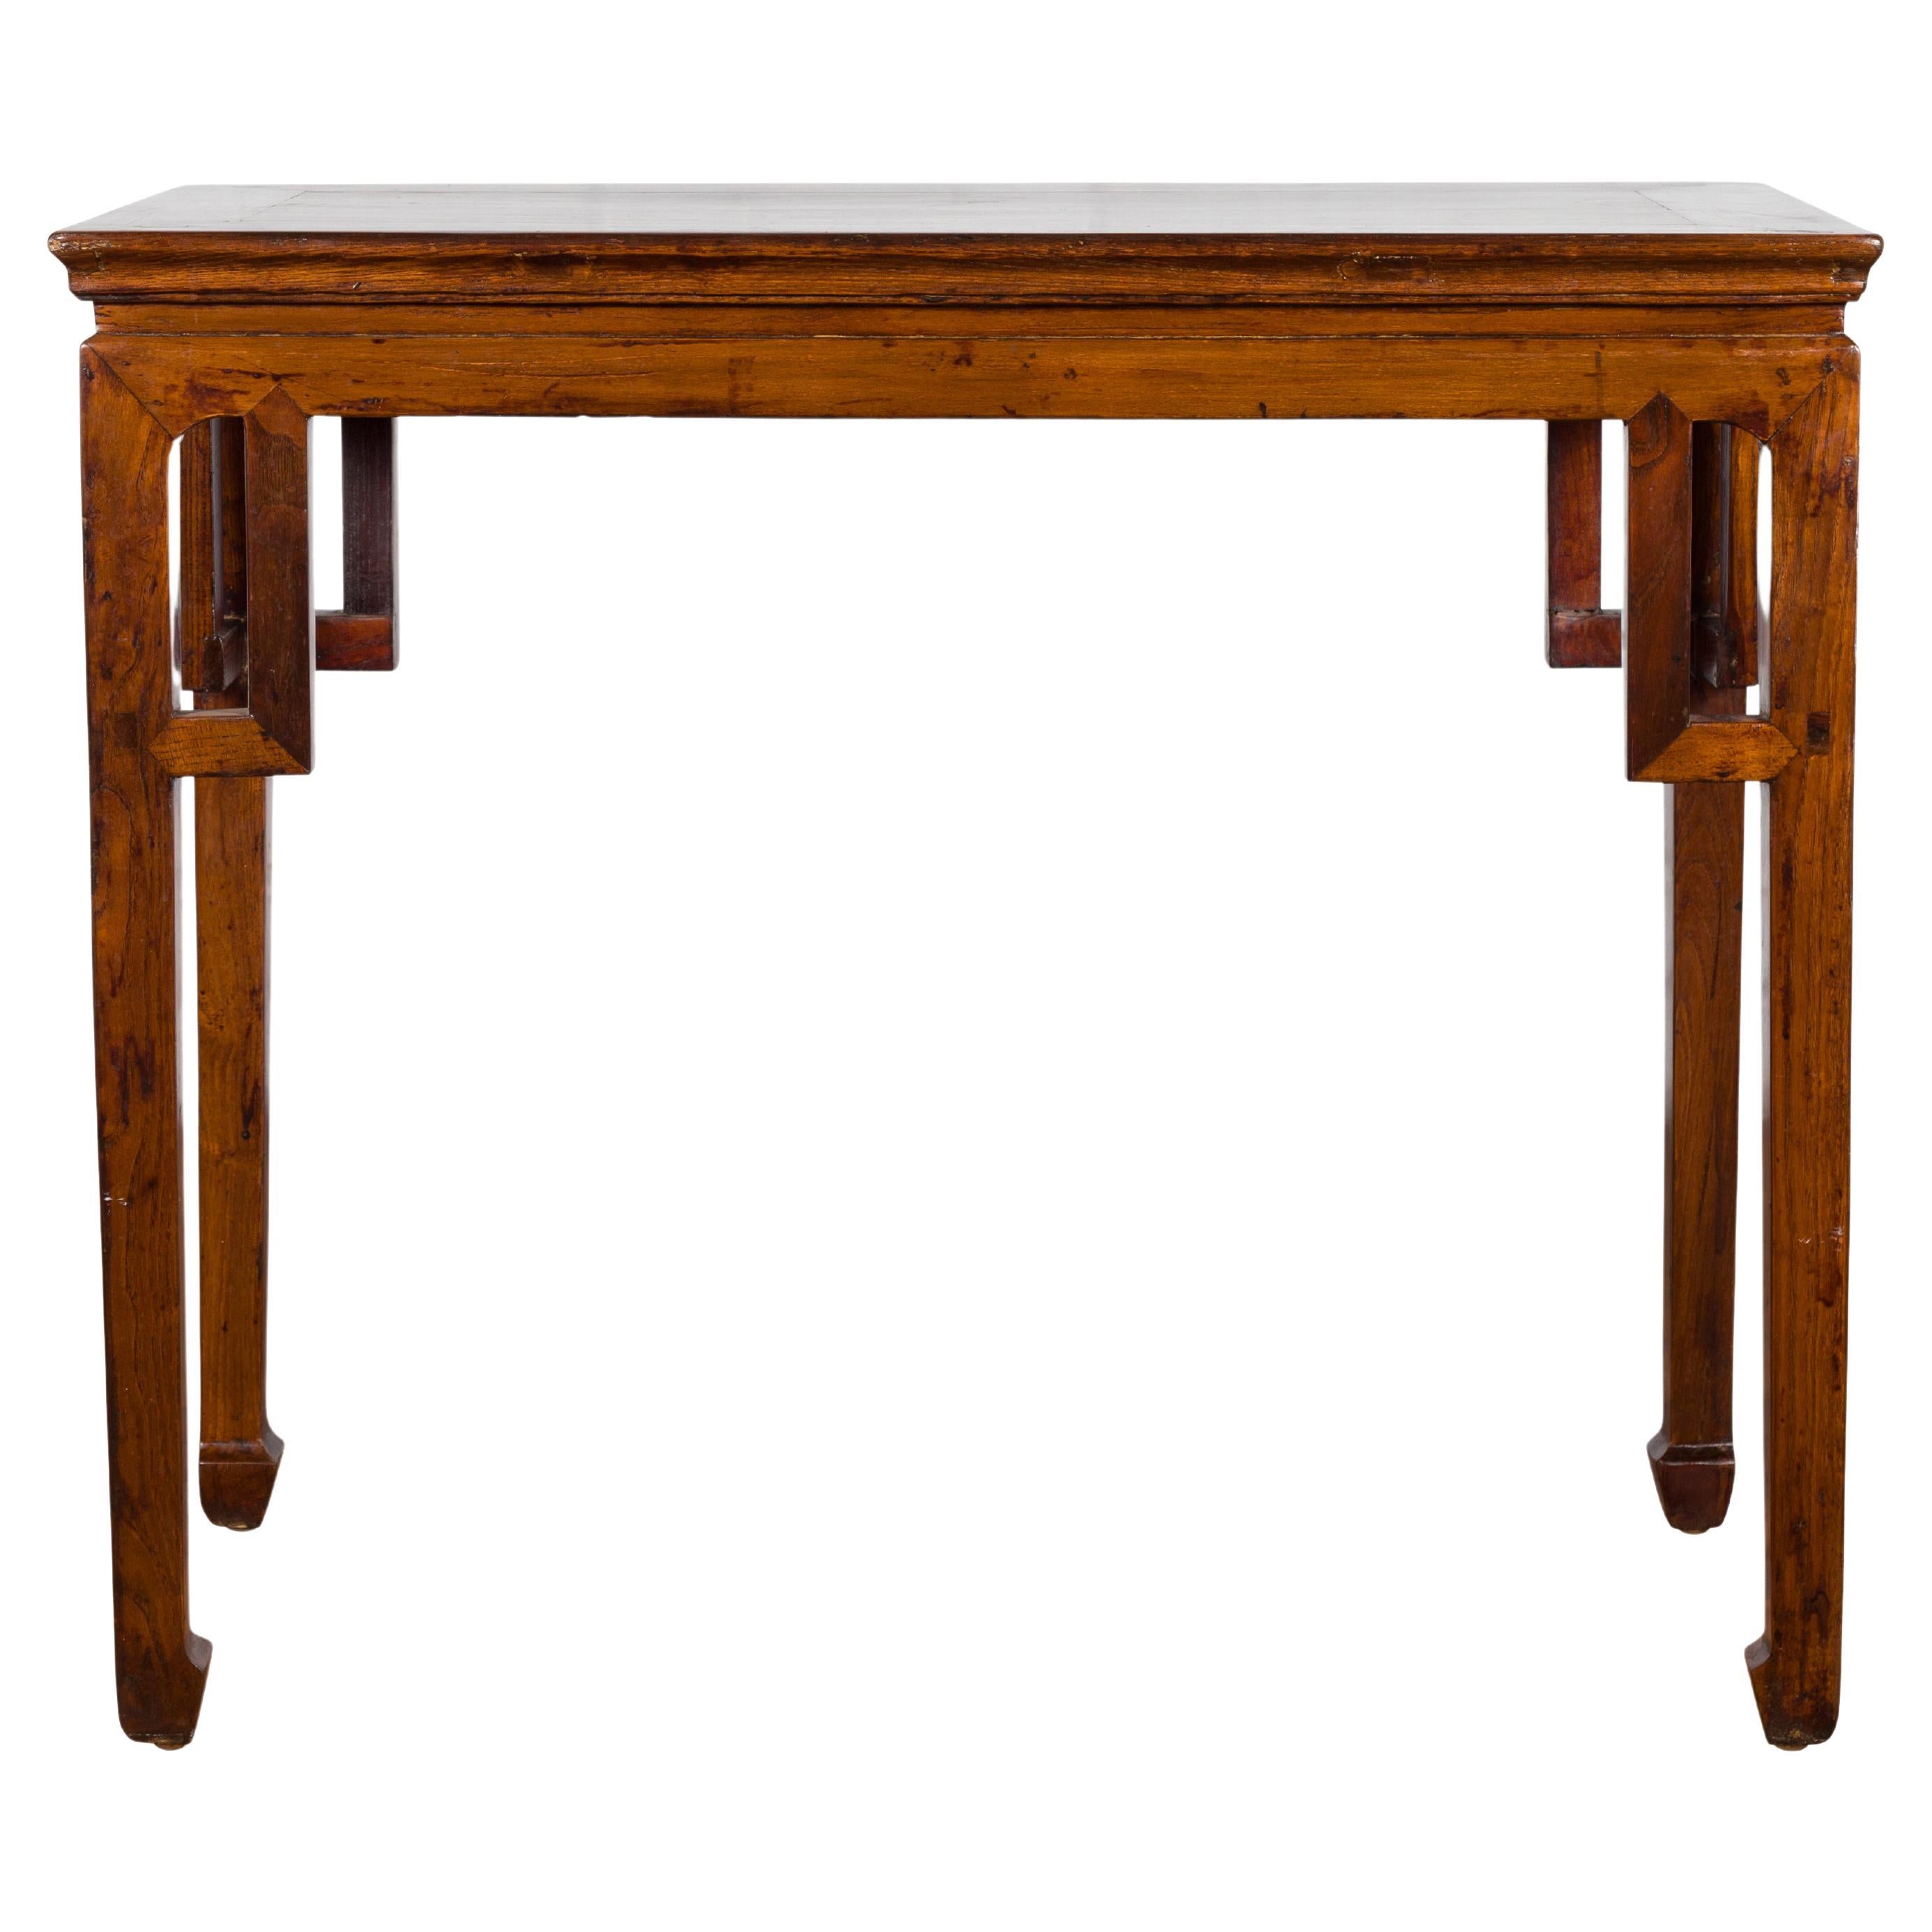 Chinese Qing Dynasty Period 19th Century Wine Table with Linear Spandrels